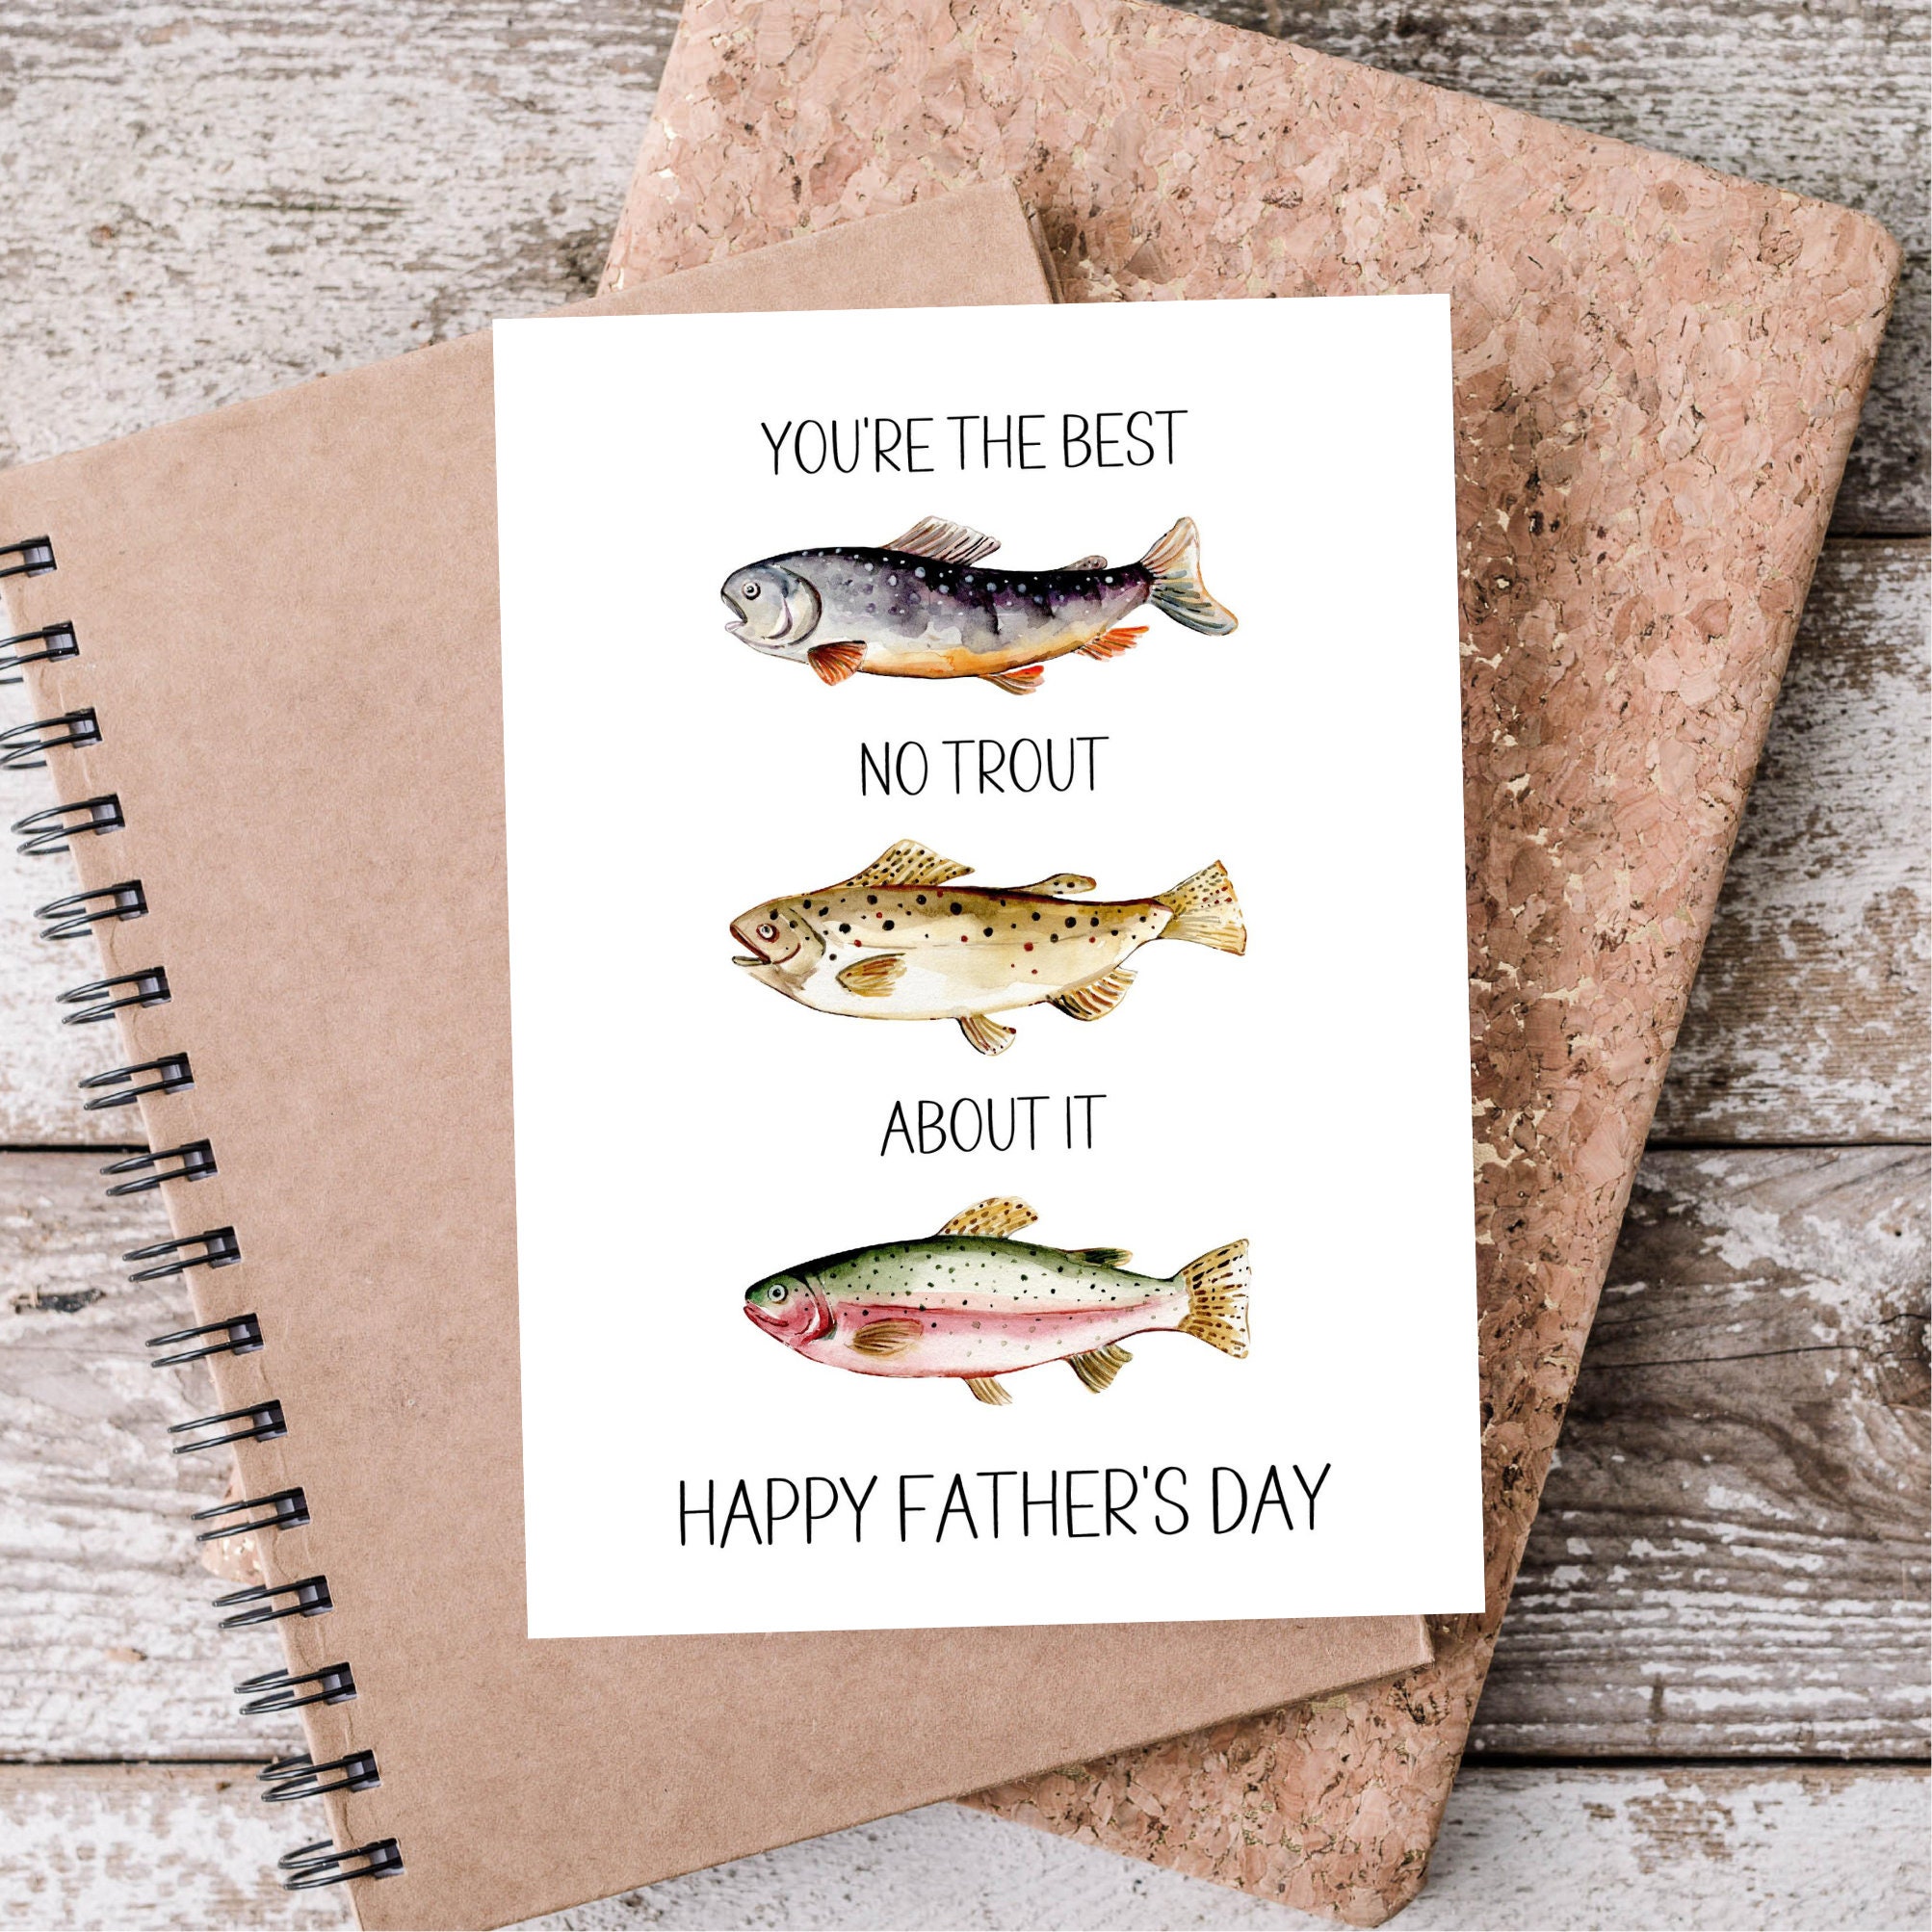 Fathers Day Fishing Gift. Fishing Trip Father's Day Gift. Fishing Trip  Gift. Fishing Trip Gift Certificate. Fishing Dad. Fishing and Dad 